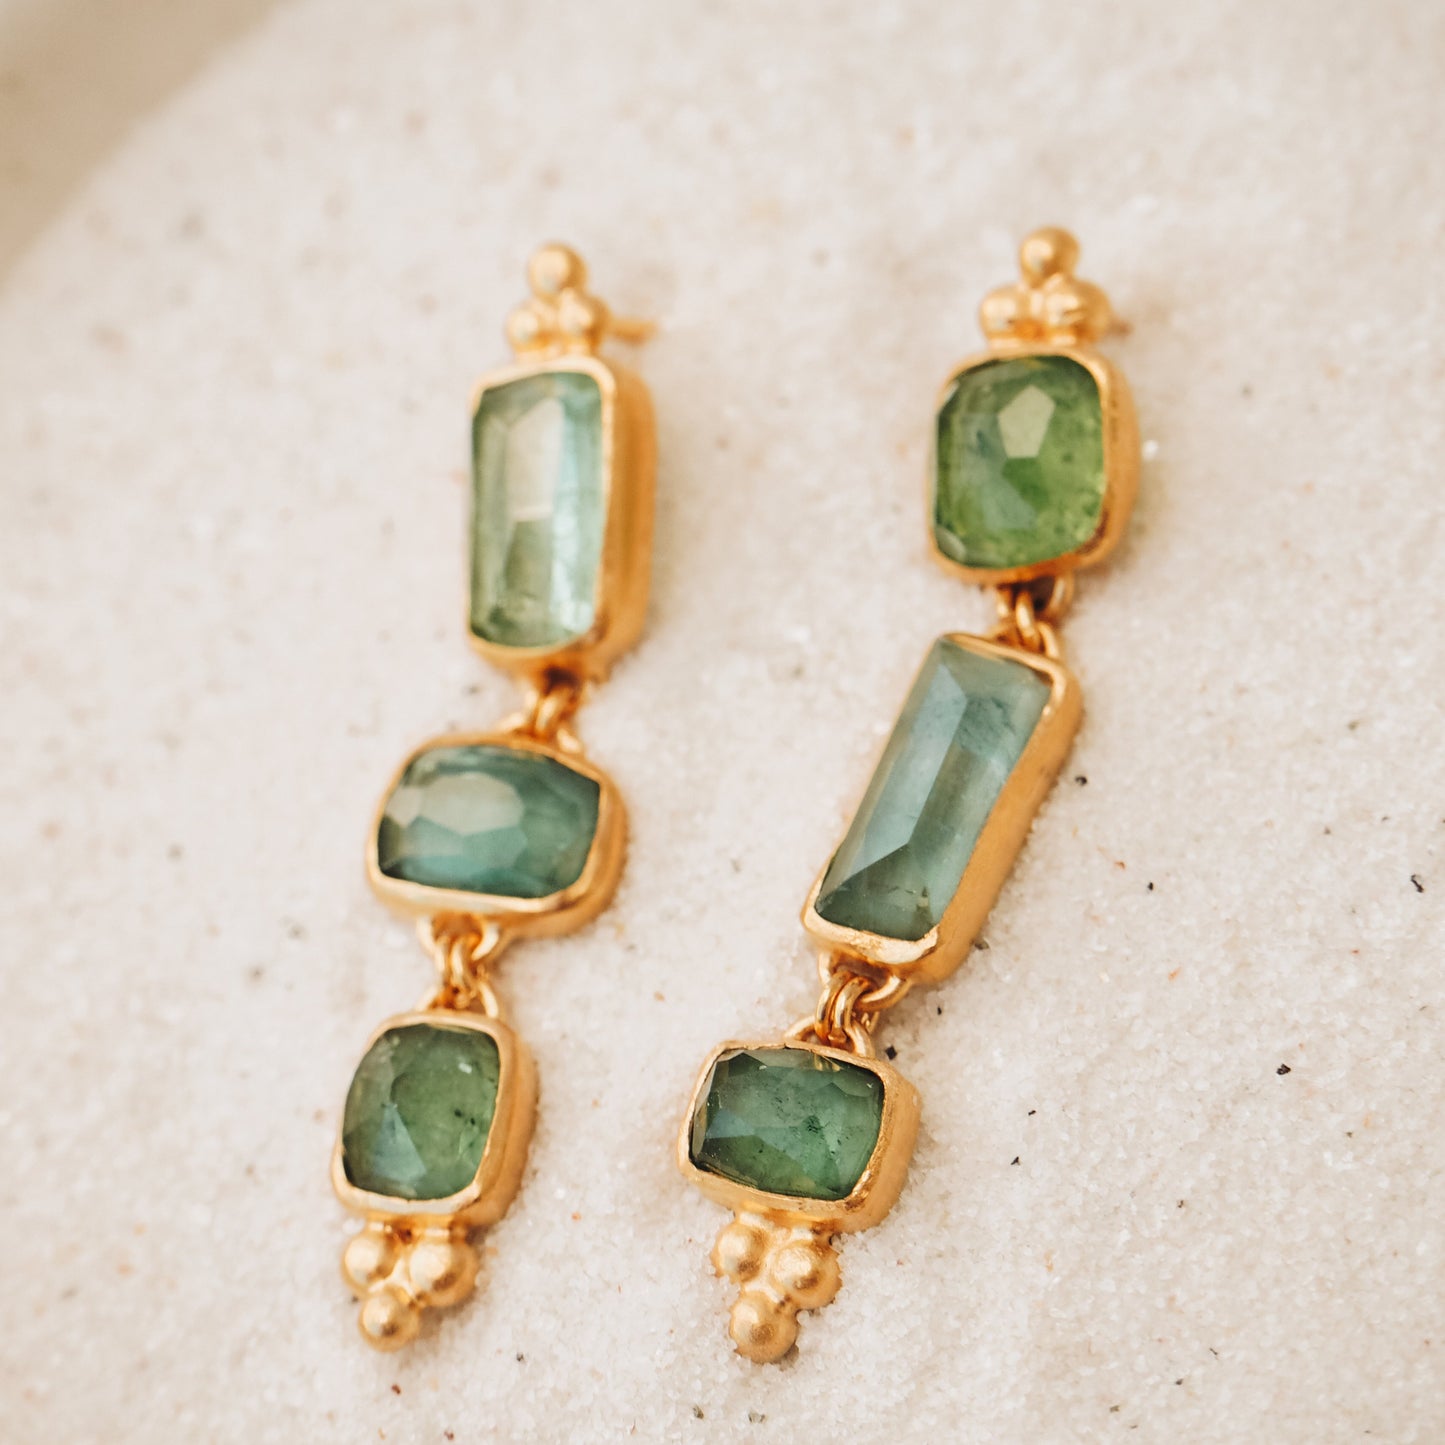 Gold gemstone drop earrings with one-of-a-kind square rose cut tourmaline in ocean blue and green, intricately detailed with granulation for a unique and captivating look.